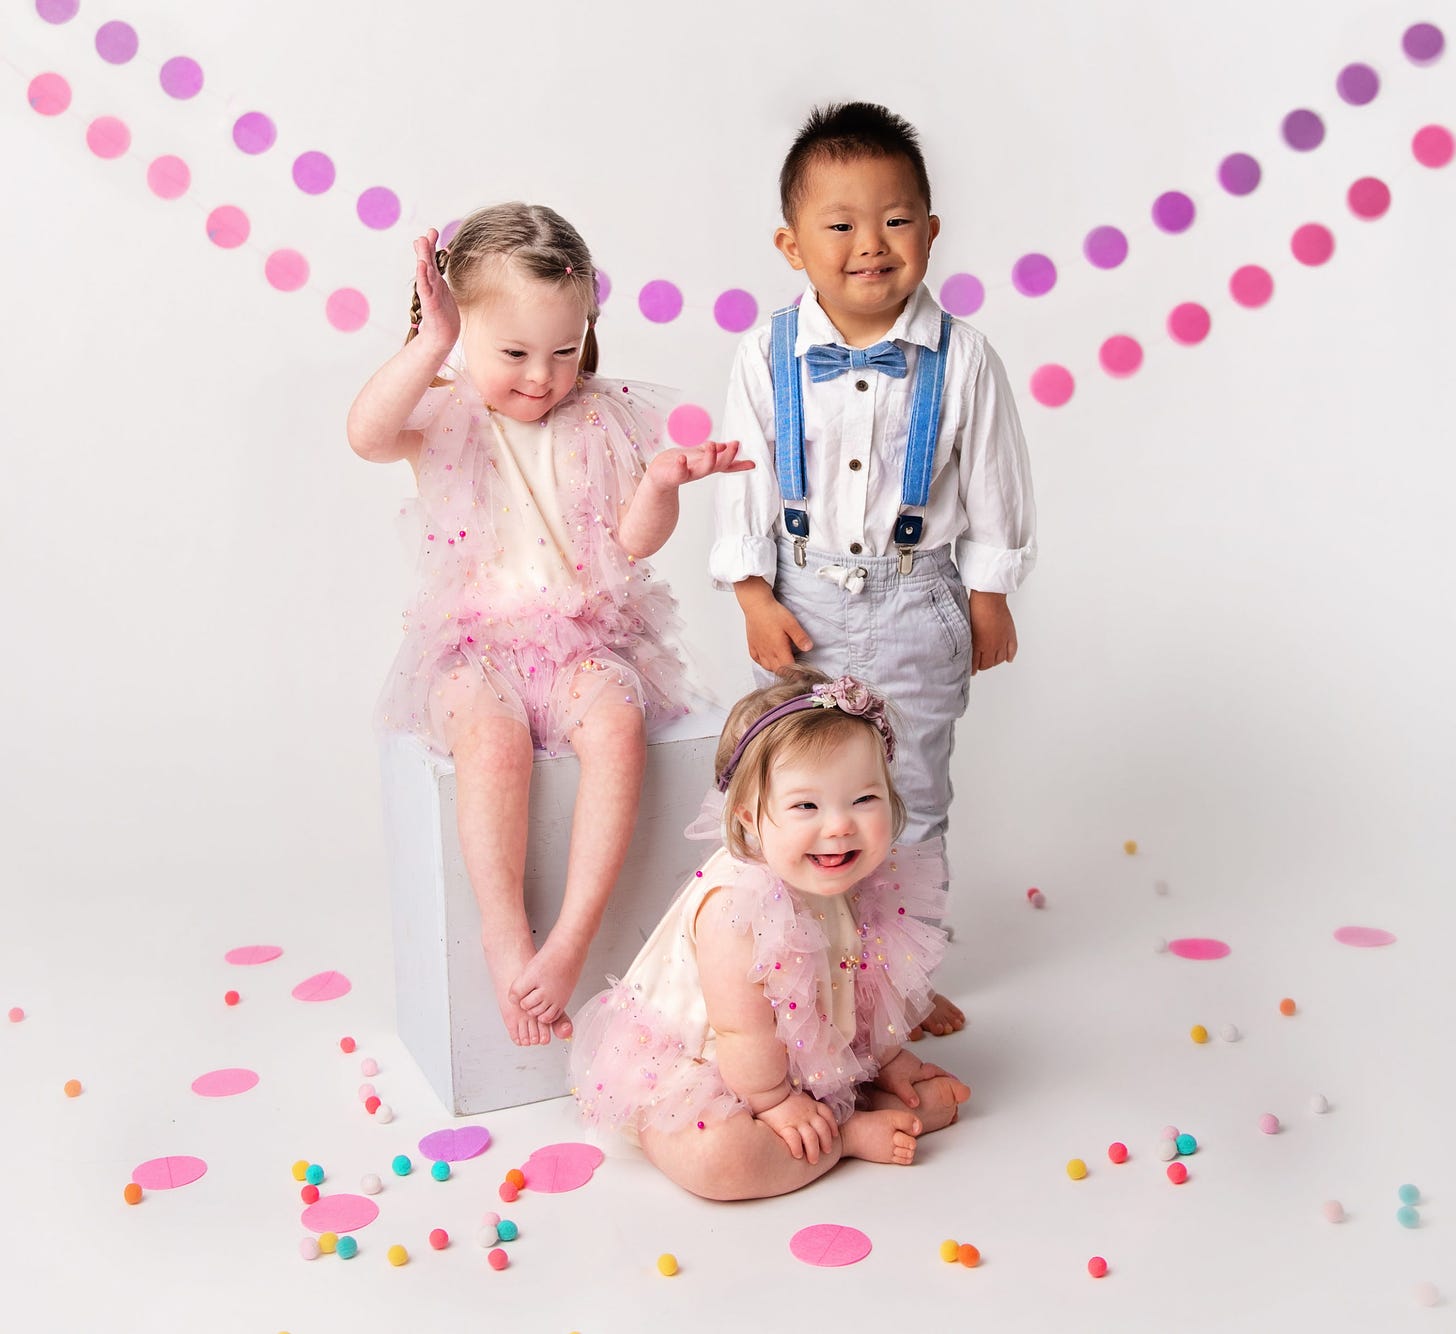 three small children smiling with white background and colorful dots .